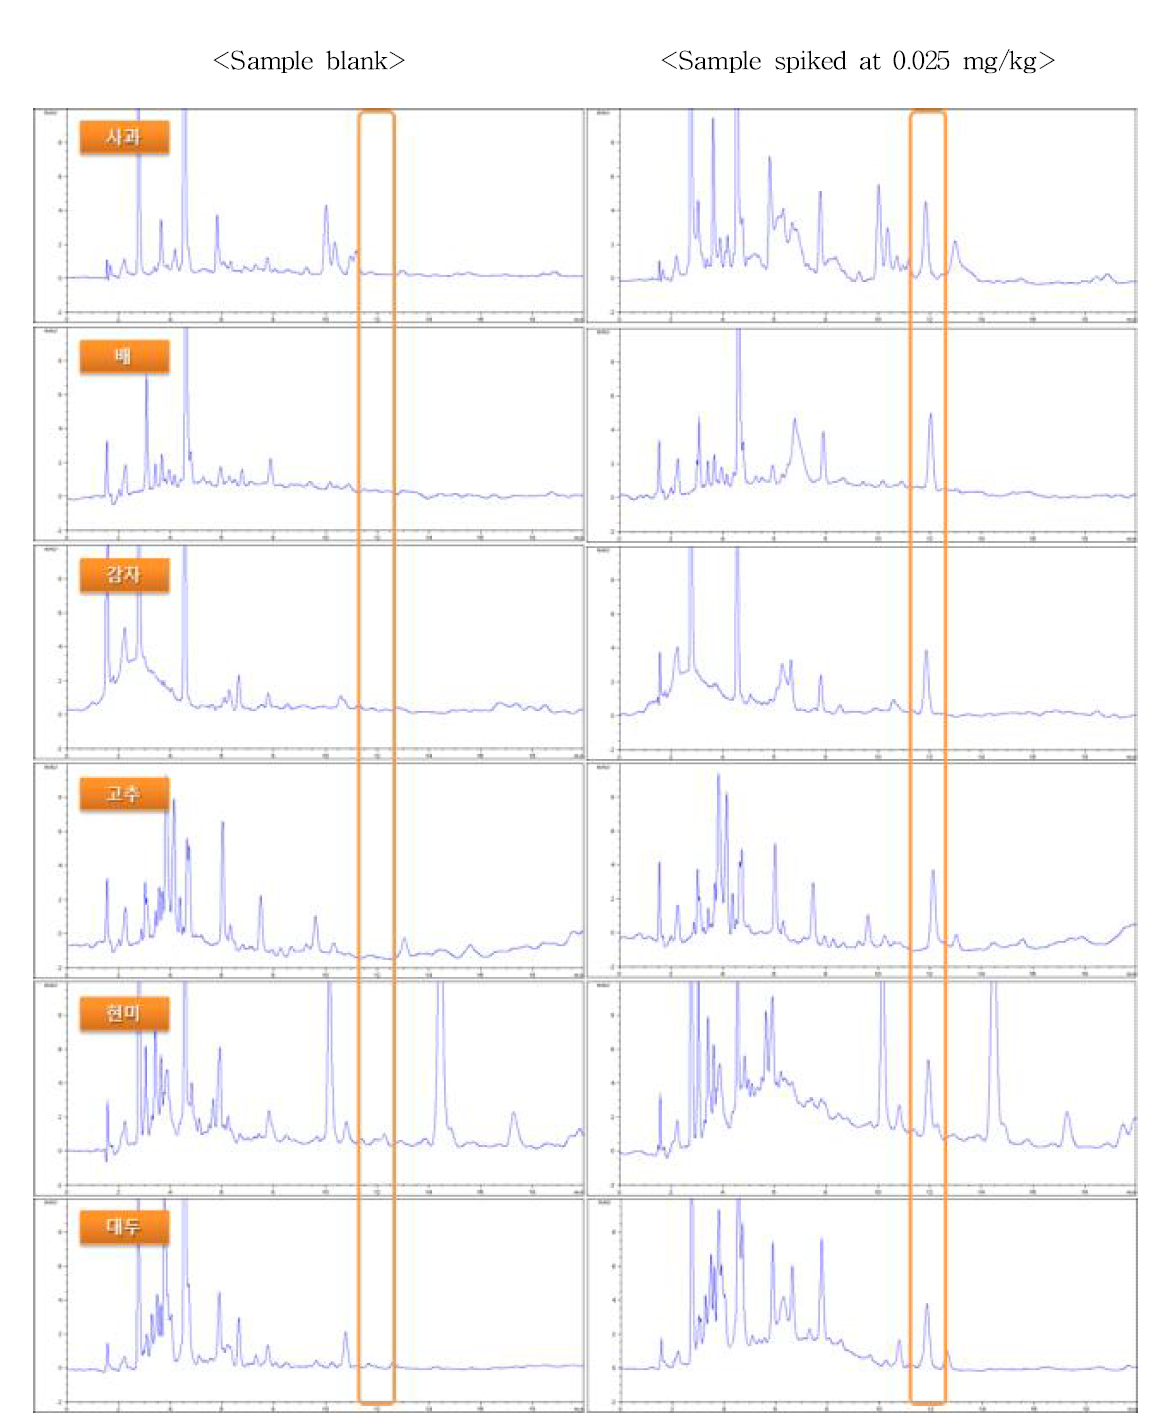 Chromatogram of sample extracts obtained by sample preparation and HPLC/UVD analysis at 0.025 mg/kg spiking leve